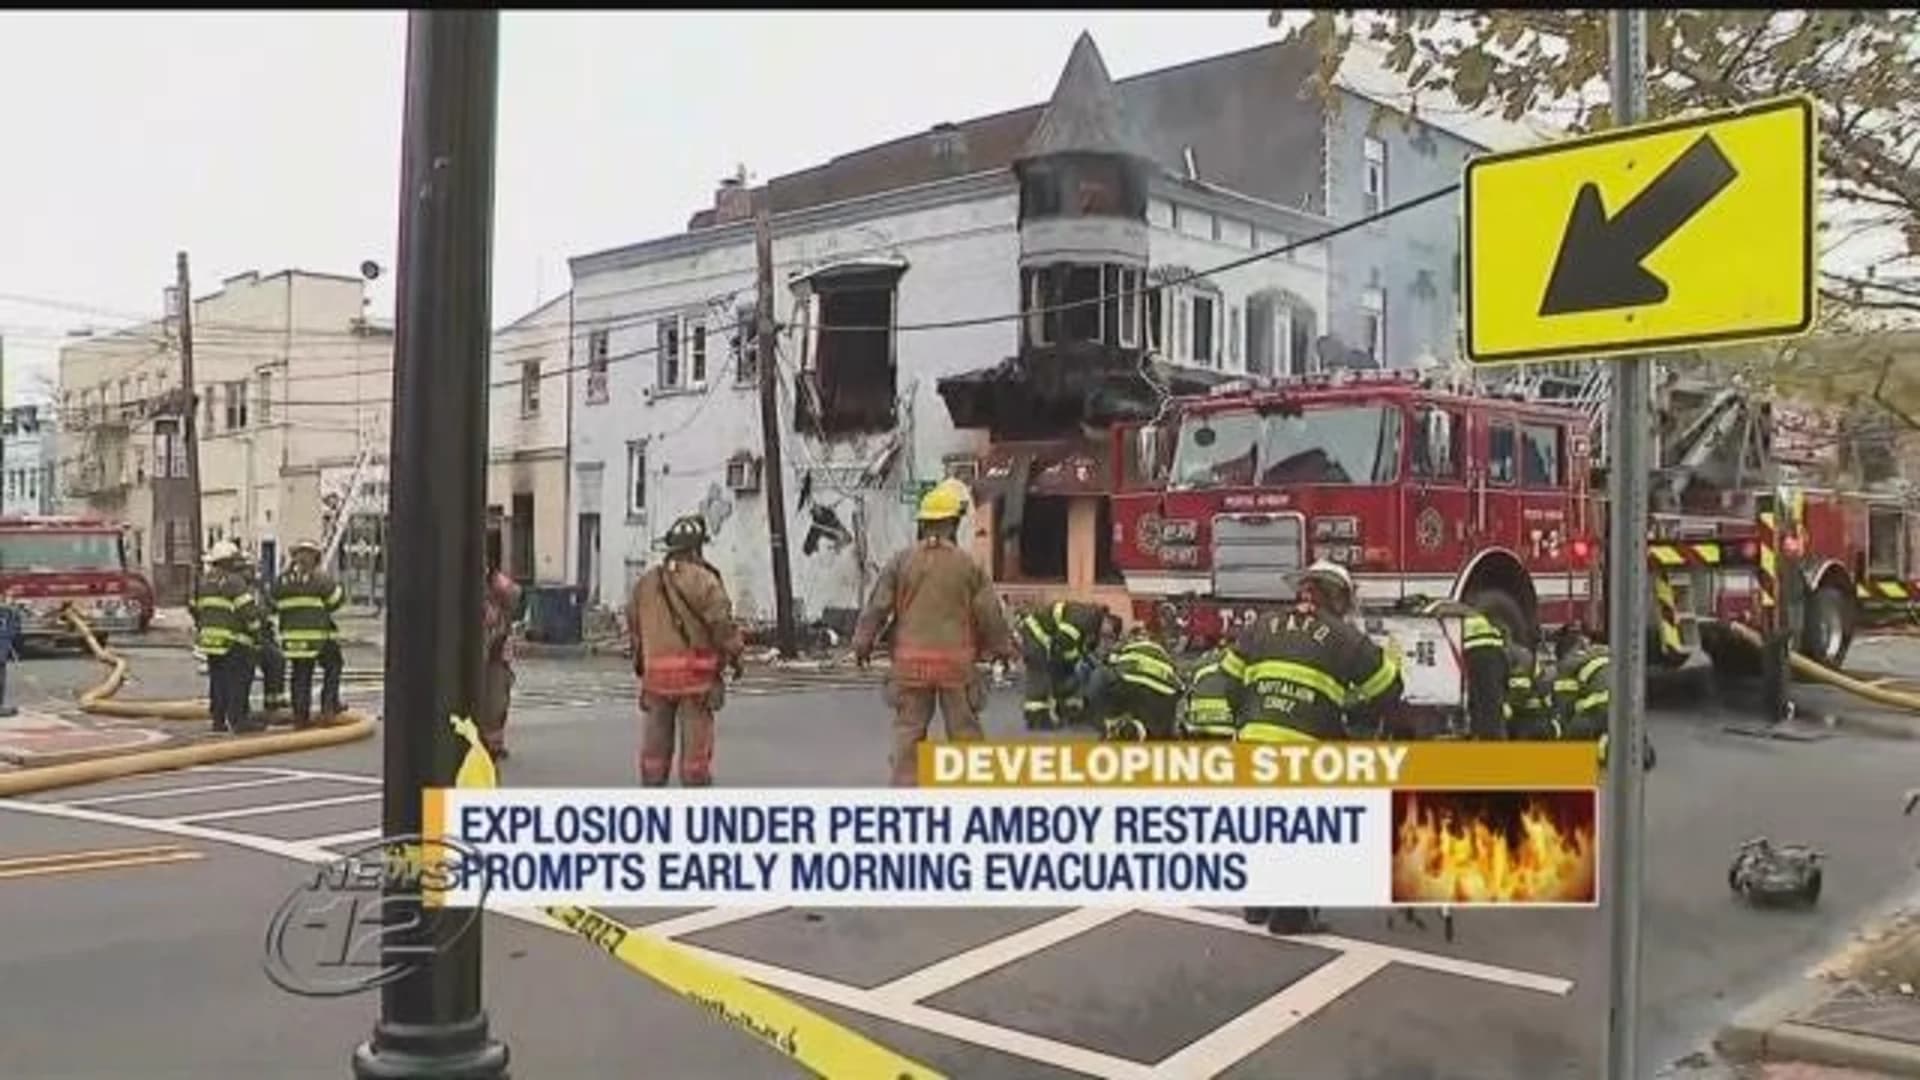 14 people displaced after explosion below Perth Amboy restaurant triggers fire